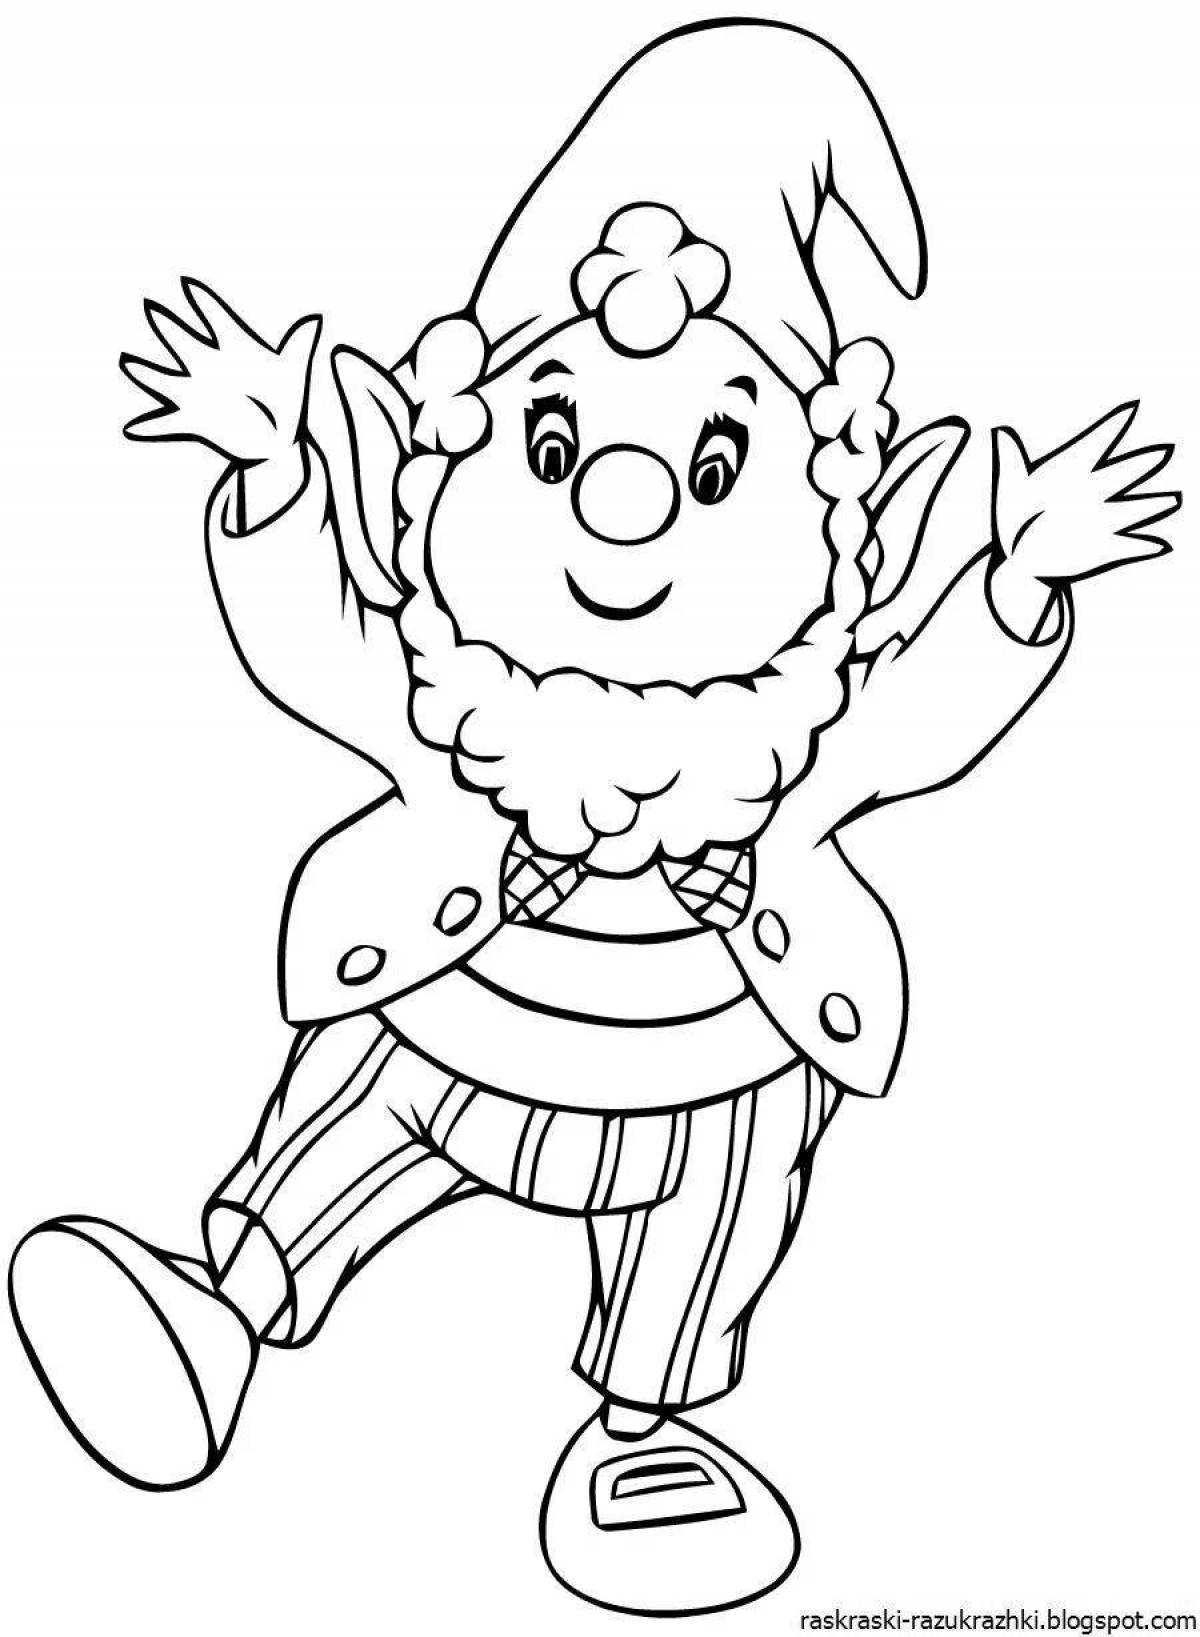 Exciting gnome coloring for kids